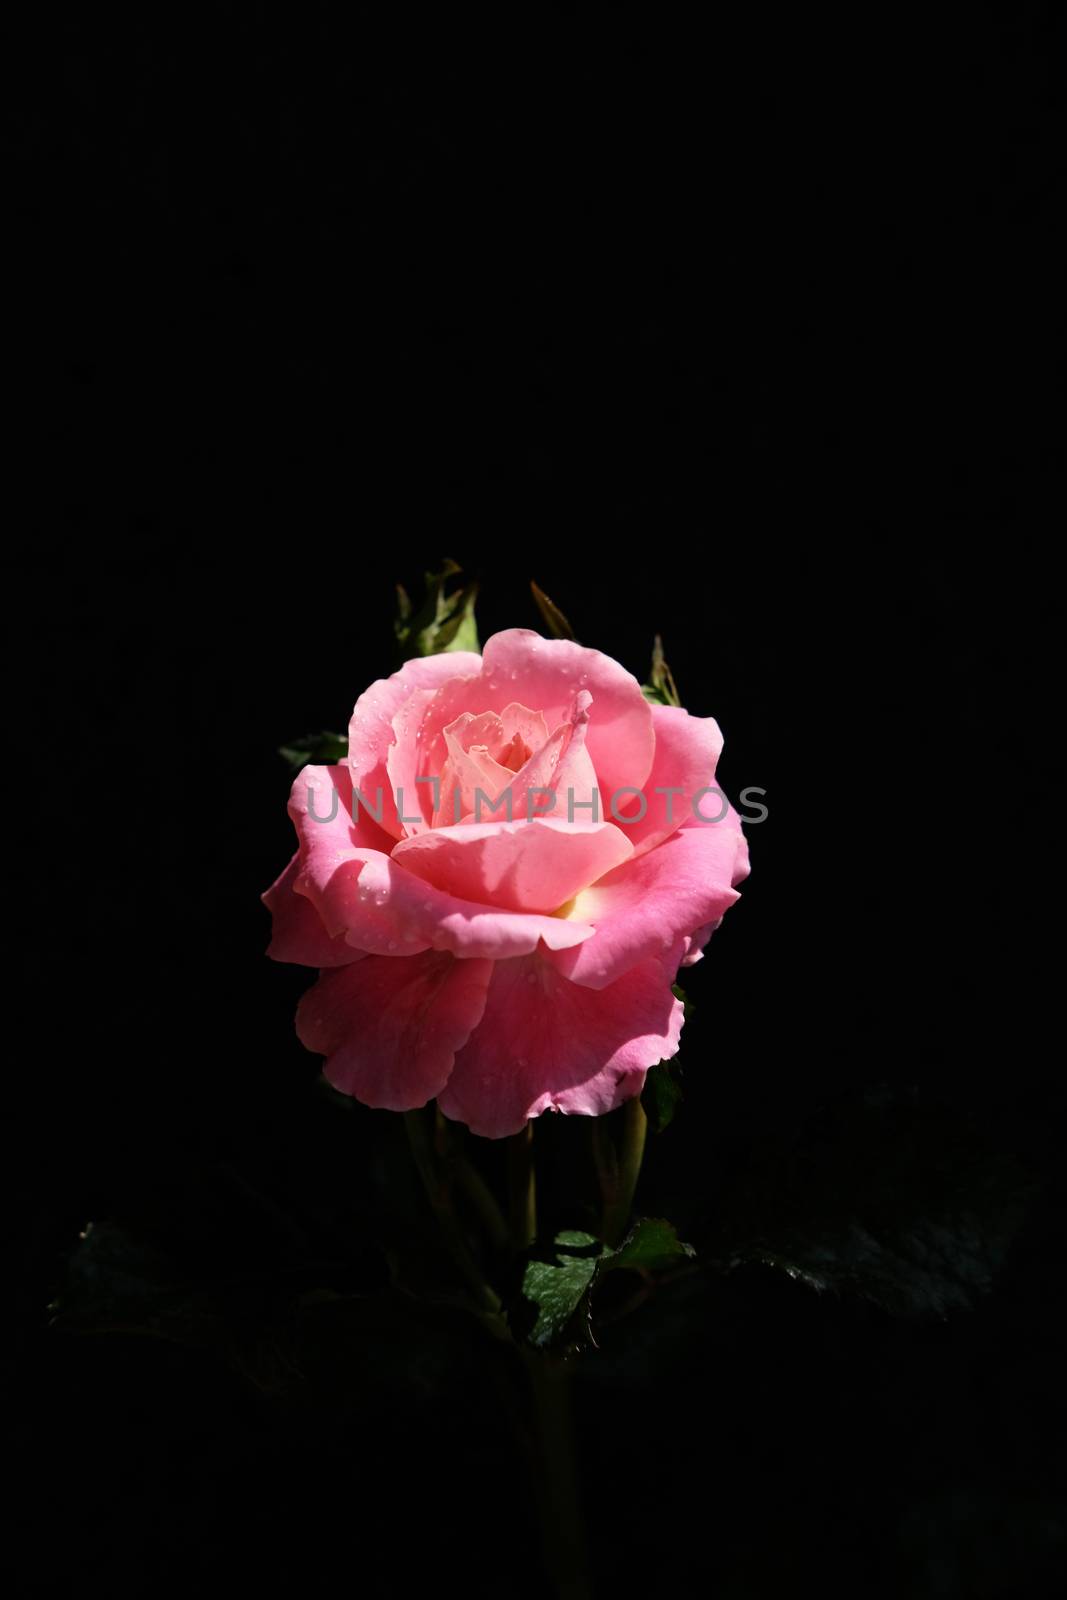 pink rose flower with stem and leaves isolated on black background. Image photo